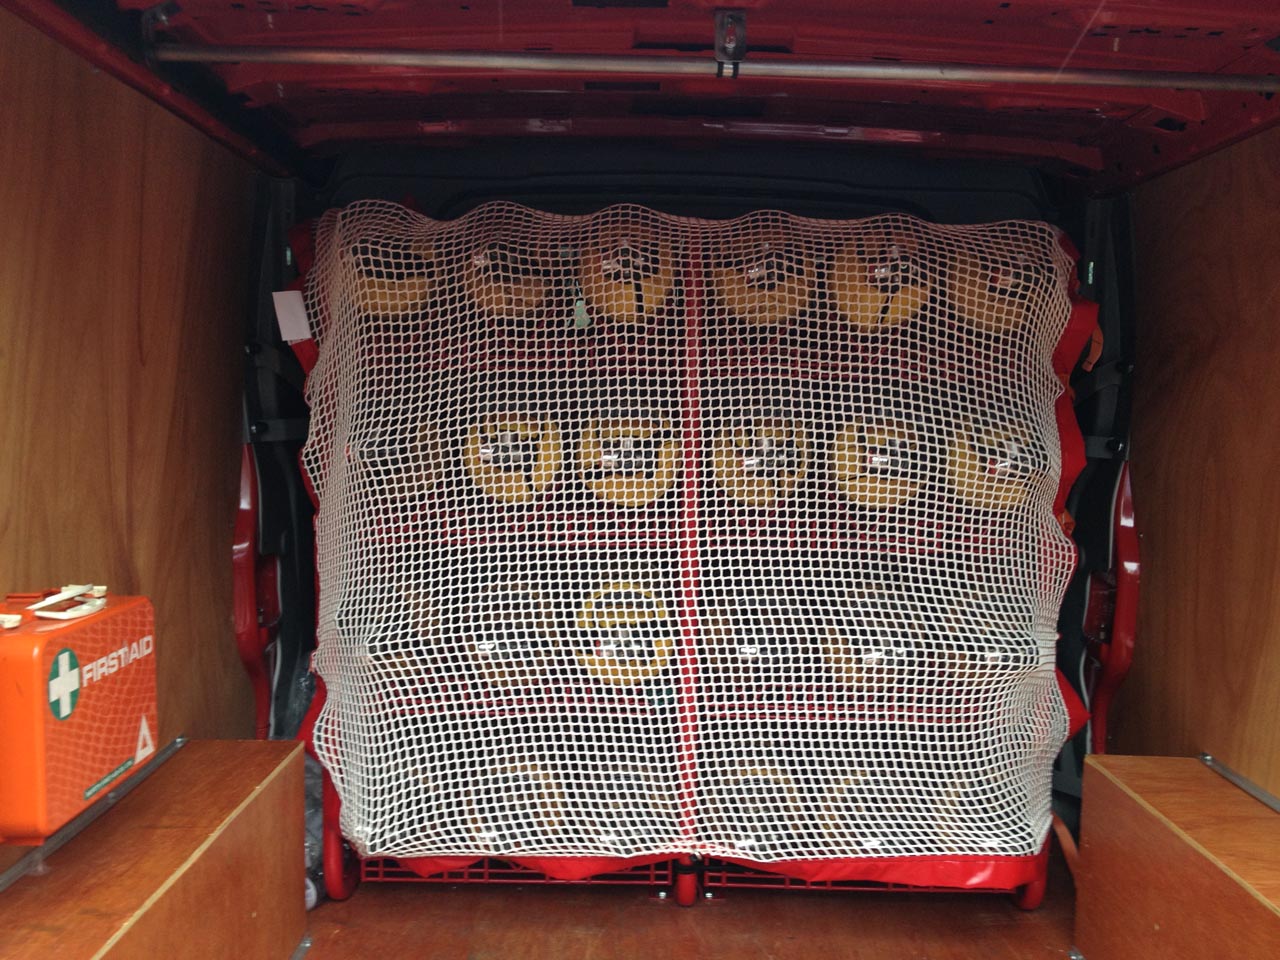 Heavy duty white cargo net with red PVC border used to restrain cylinders in an emergency service vehicle